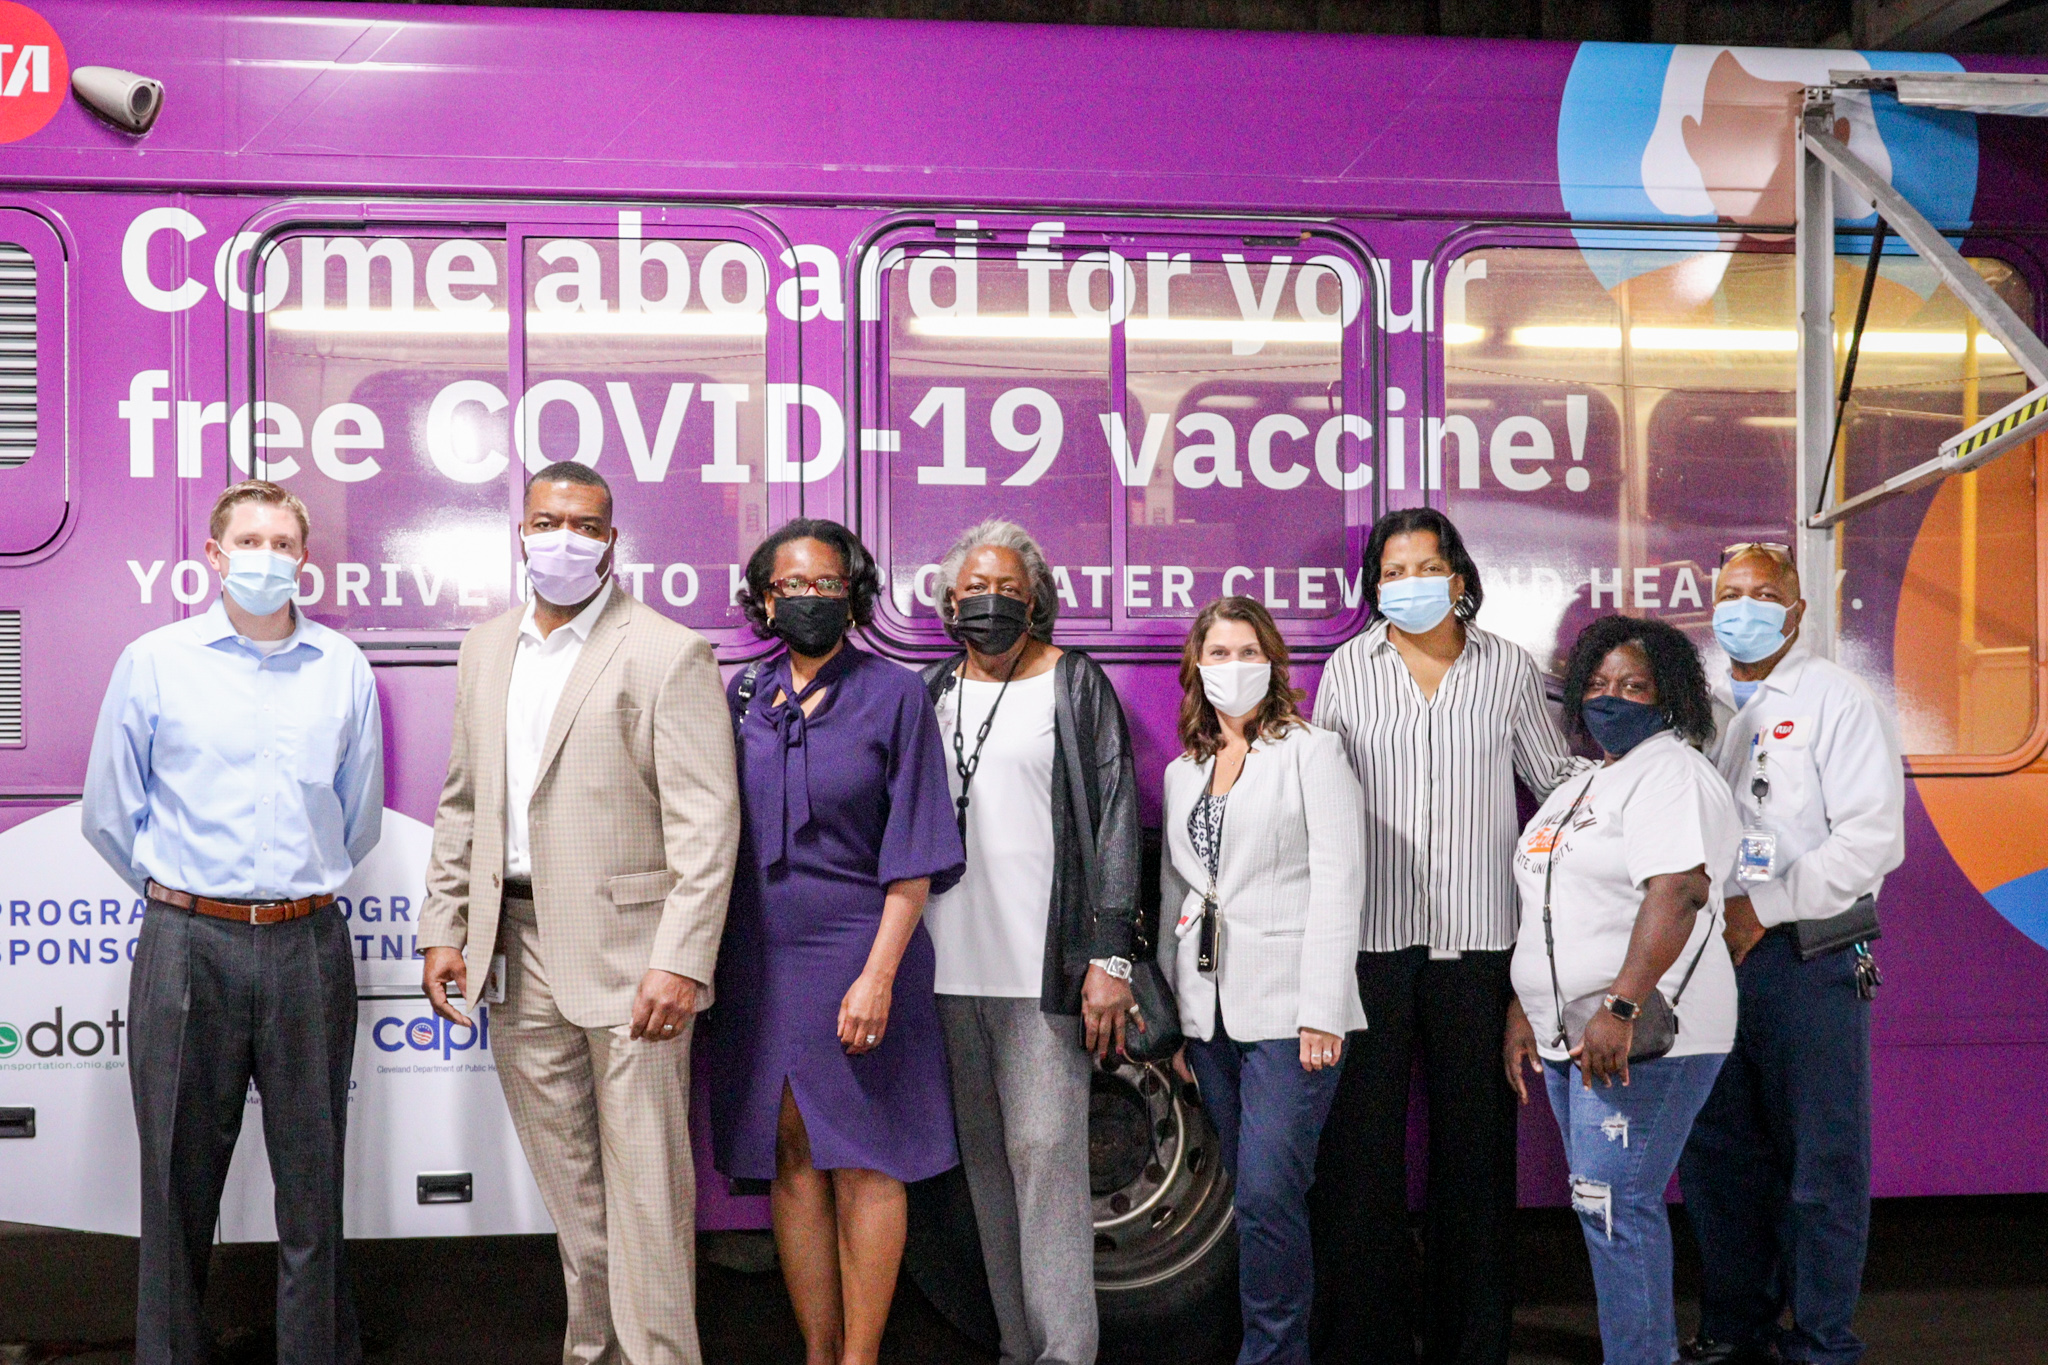  RTA and Care Alliance Health Center Partner to provide COVID-19 Vaccines and Testing County Wide